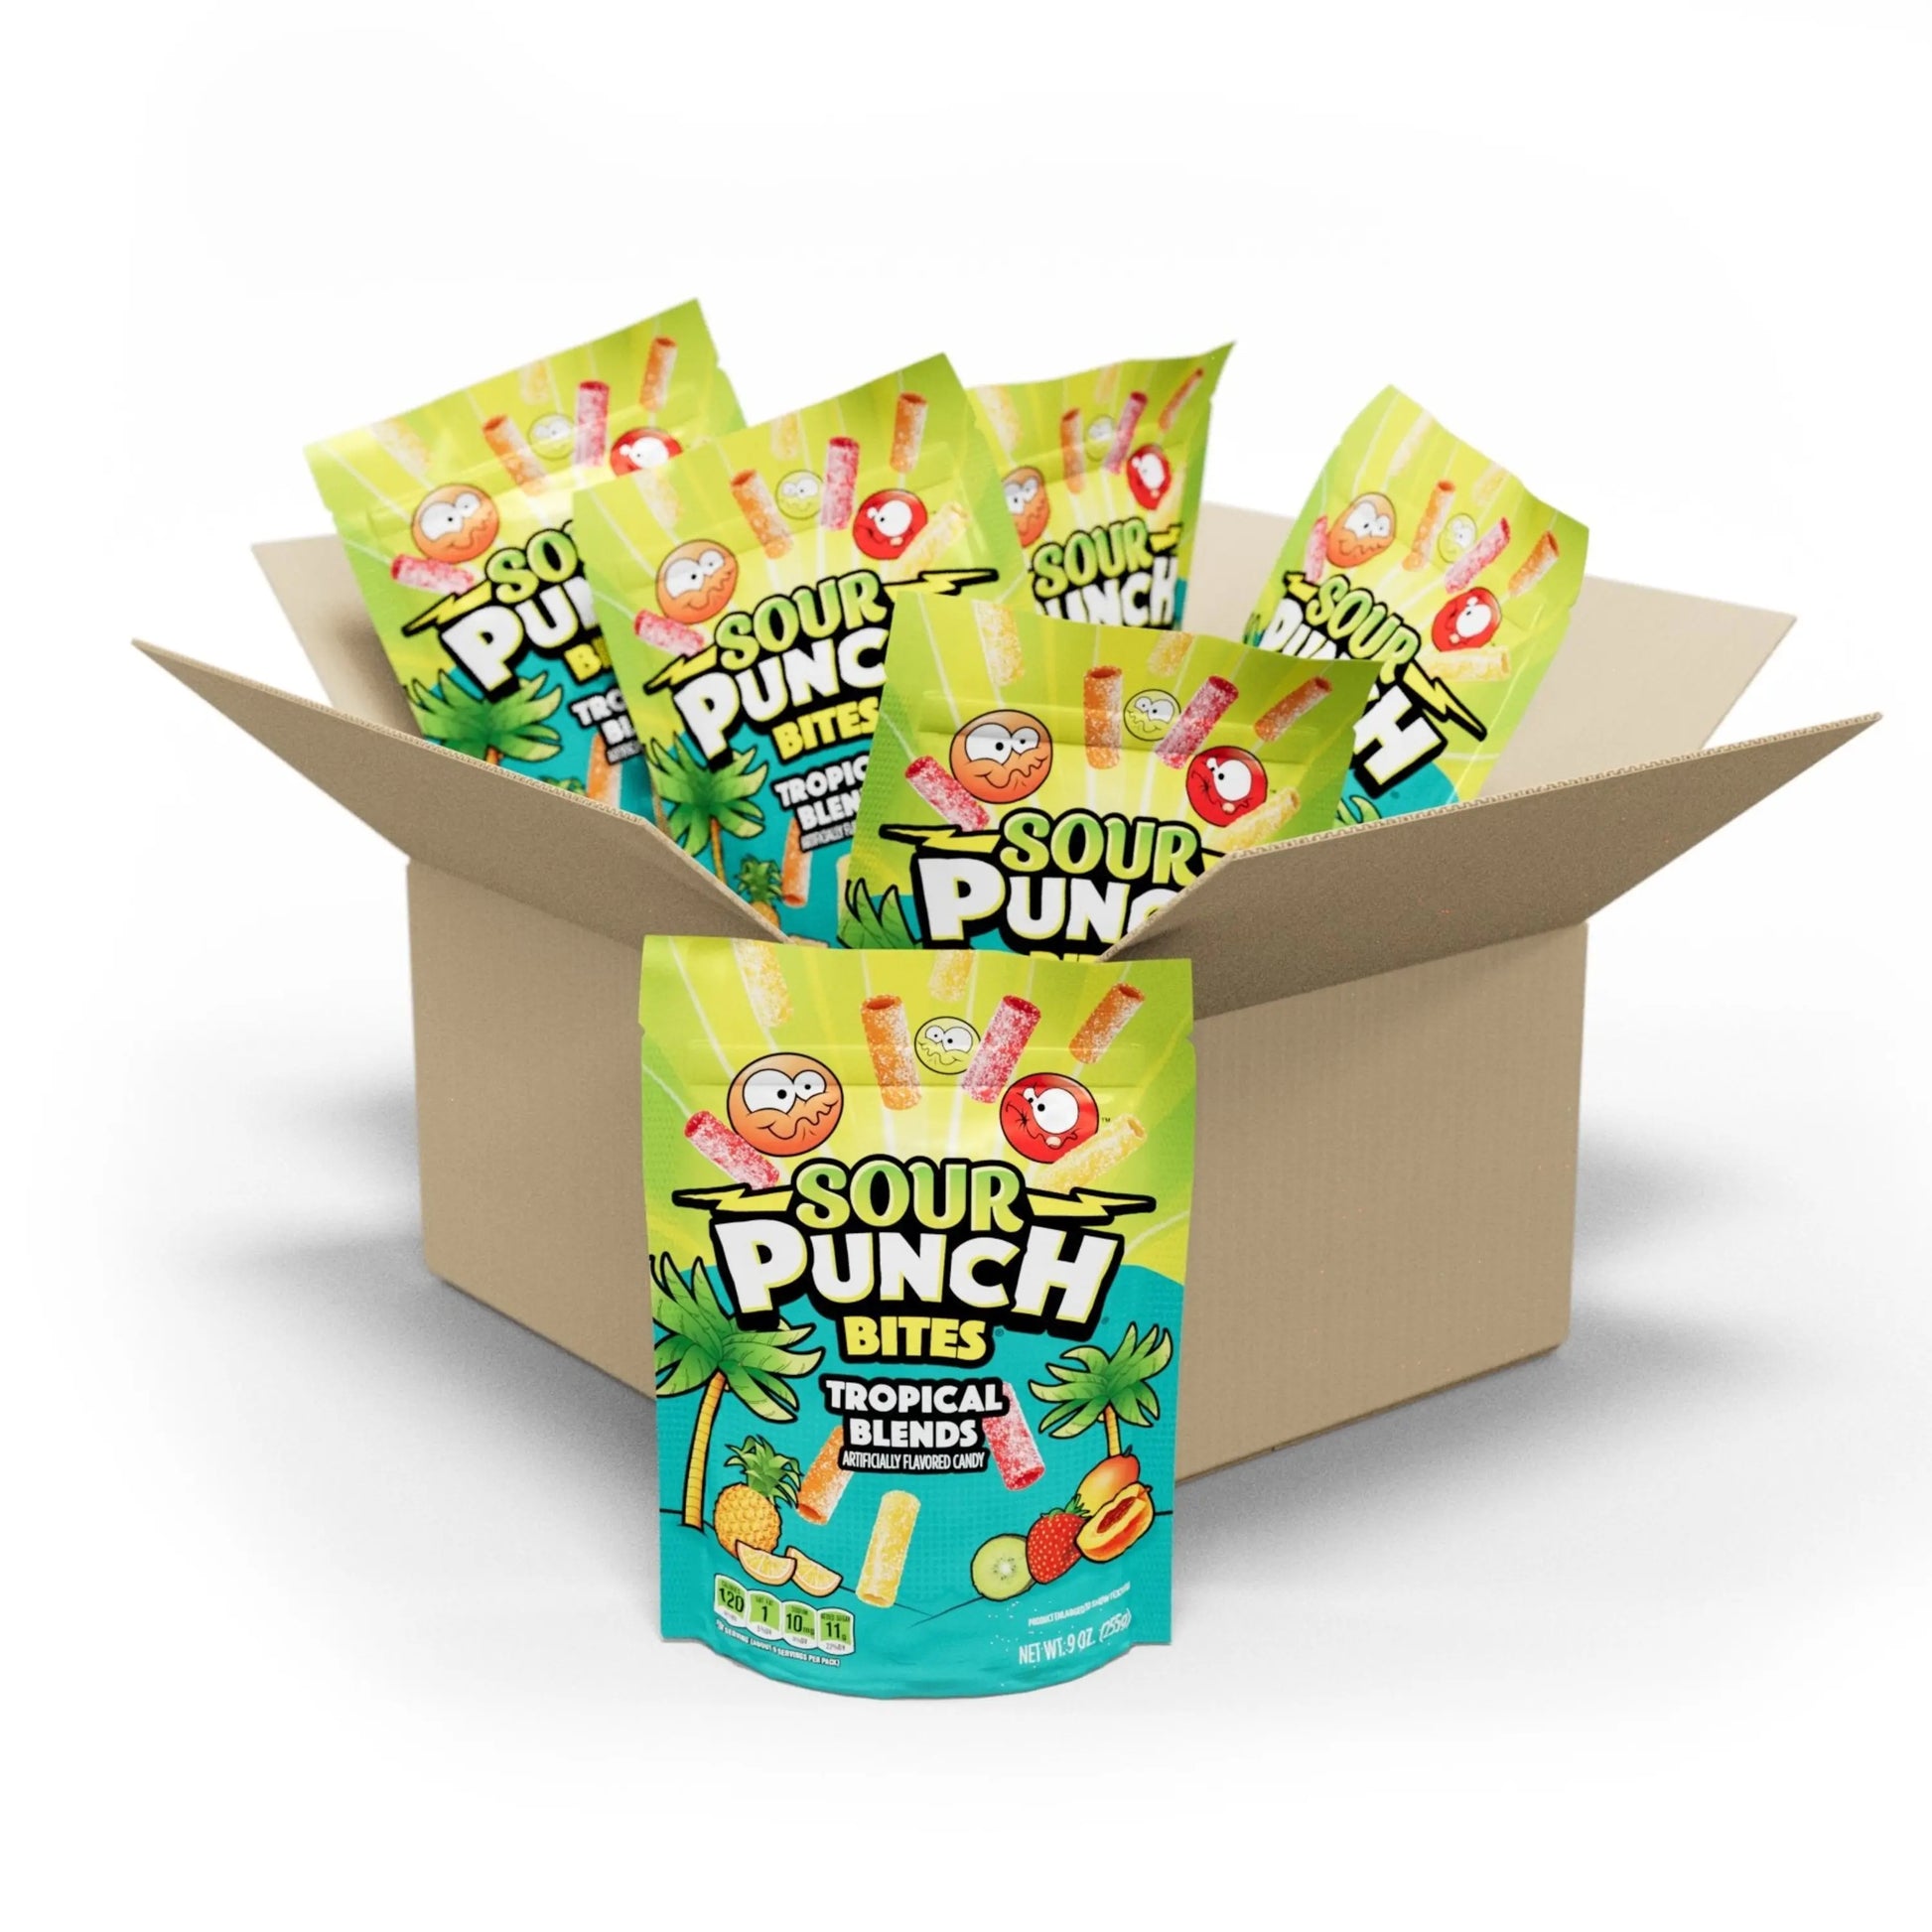 6 Count box of Sour Punch Bites Tropical Blends Candy 9oz bags